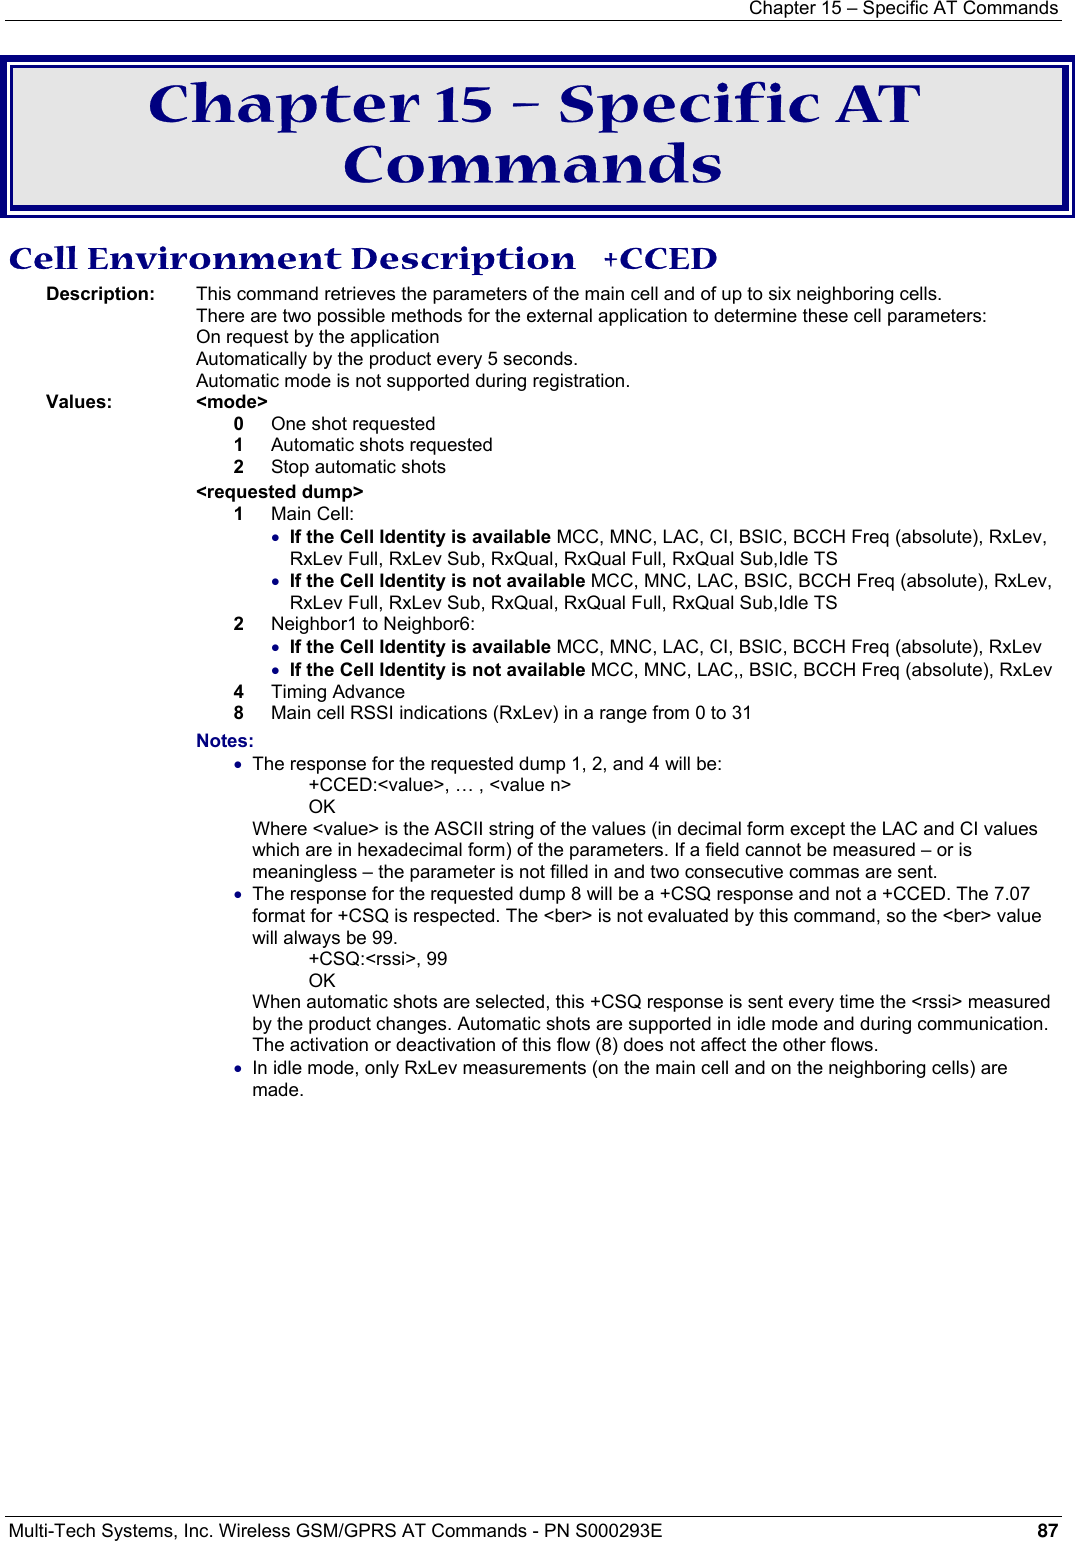 Chapter 15 – Specific AT Commands  Multi-Tech Systems, Inc. Wireless GSM/GPRS AT Commands - PN S000293E 87   Chapter 15 – Specific AT Commands Cell Environment Description   +CCED Description:   This command retrieves the parameters of the main cell and of up to six neighboring cells.  There are two possible methods for the external application to determine these cell parameters:  On request by the application Automatically by the product every 5 seconds.  Automatic mode is not supported during registration. Values:   &lt;mode&gt;  0   One shot requested 1   Automatic shots requested 2   Stop automatic shots  &lt;requested dump&gt;  1   Main Cell:  • If the Cell Identity is available MCC, MNC, LAC, CI, BSIC, BCCH Freq (absolute), RxLev, RxLev Full, RxLev Sub, RxQual, RxQual Full, RxQual Sub,Idle TS  • If the Cell Identity is not available MCC, MNC, LAC, BSIC, BCCH Freq (absolute), RxLev, RxLev Full, RxLev Sub, RxQual, RxQual Full, RxQual Sub,Idle TS 2   Neighbor1 to Neighbor6:  • If the Cell Identity is available MCC, MNC, LAC, CI, BSIC, BCCH Freq (absolute), RxLev  • If the Cell Identity is not available MCC, MNC, LAC,, BSIC, BCCH Freq (absolute), RxLev 4   Timing Advance 8   Main cell RSSI indications (RxLev) in a range from 0 to 31 Notes: • The response for the requested dump 1, 2, and 4 will be: +CCED:&lt;value&gt;, … , &lt;value n&gt; OK Where &lt;value&gt; is the ASCII string of the values (in decimal form except the LAC and CI values which are in hexadecimal form) of the parameters. If a field cannot be measured – or is meaningless – the parameter is not filled in and two consecutive commas are sent.  • The response for the requested dump 8 will be a +CSQ response and not a +CCED. The 7.07 format for +CSQ is respected. The &lt;ber&gt; is not evaluated by this command, so the &lt;ber&gt; value will always be 99. +CSQ:&lt;rssi&gt;, 99 OK When automatic shots are selected, this +CSQ response is sent every time the &lt;rssi&gt; measured by the product changes. Automatic shots are supported in idle mode and during communication. The activation or deactivation of this flow (8) does not affect the other flows.  • In idle mode, only RxLev measurements (on the main cell and on the neighboring cells) are made. 